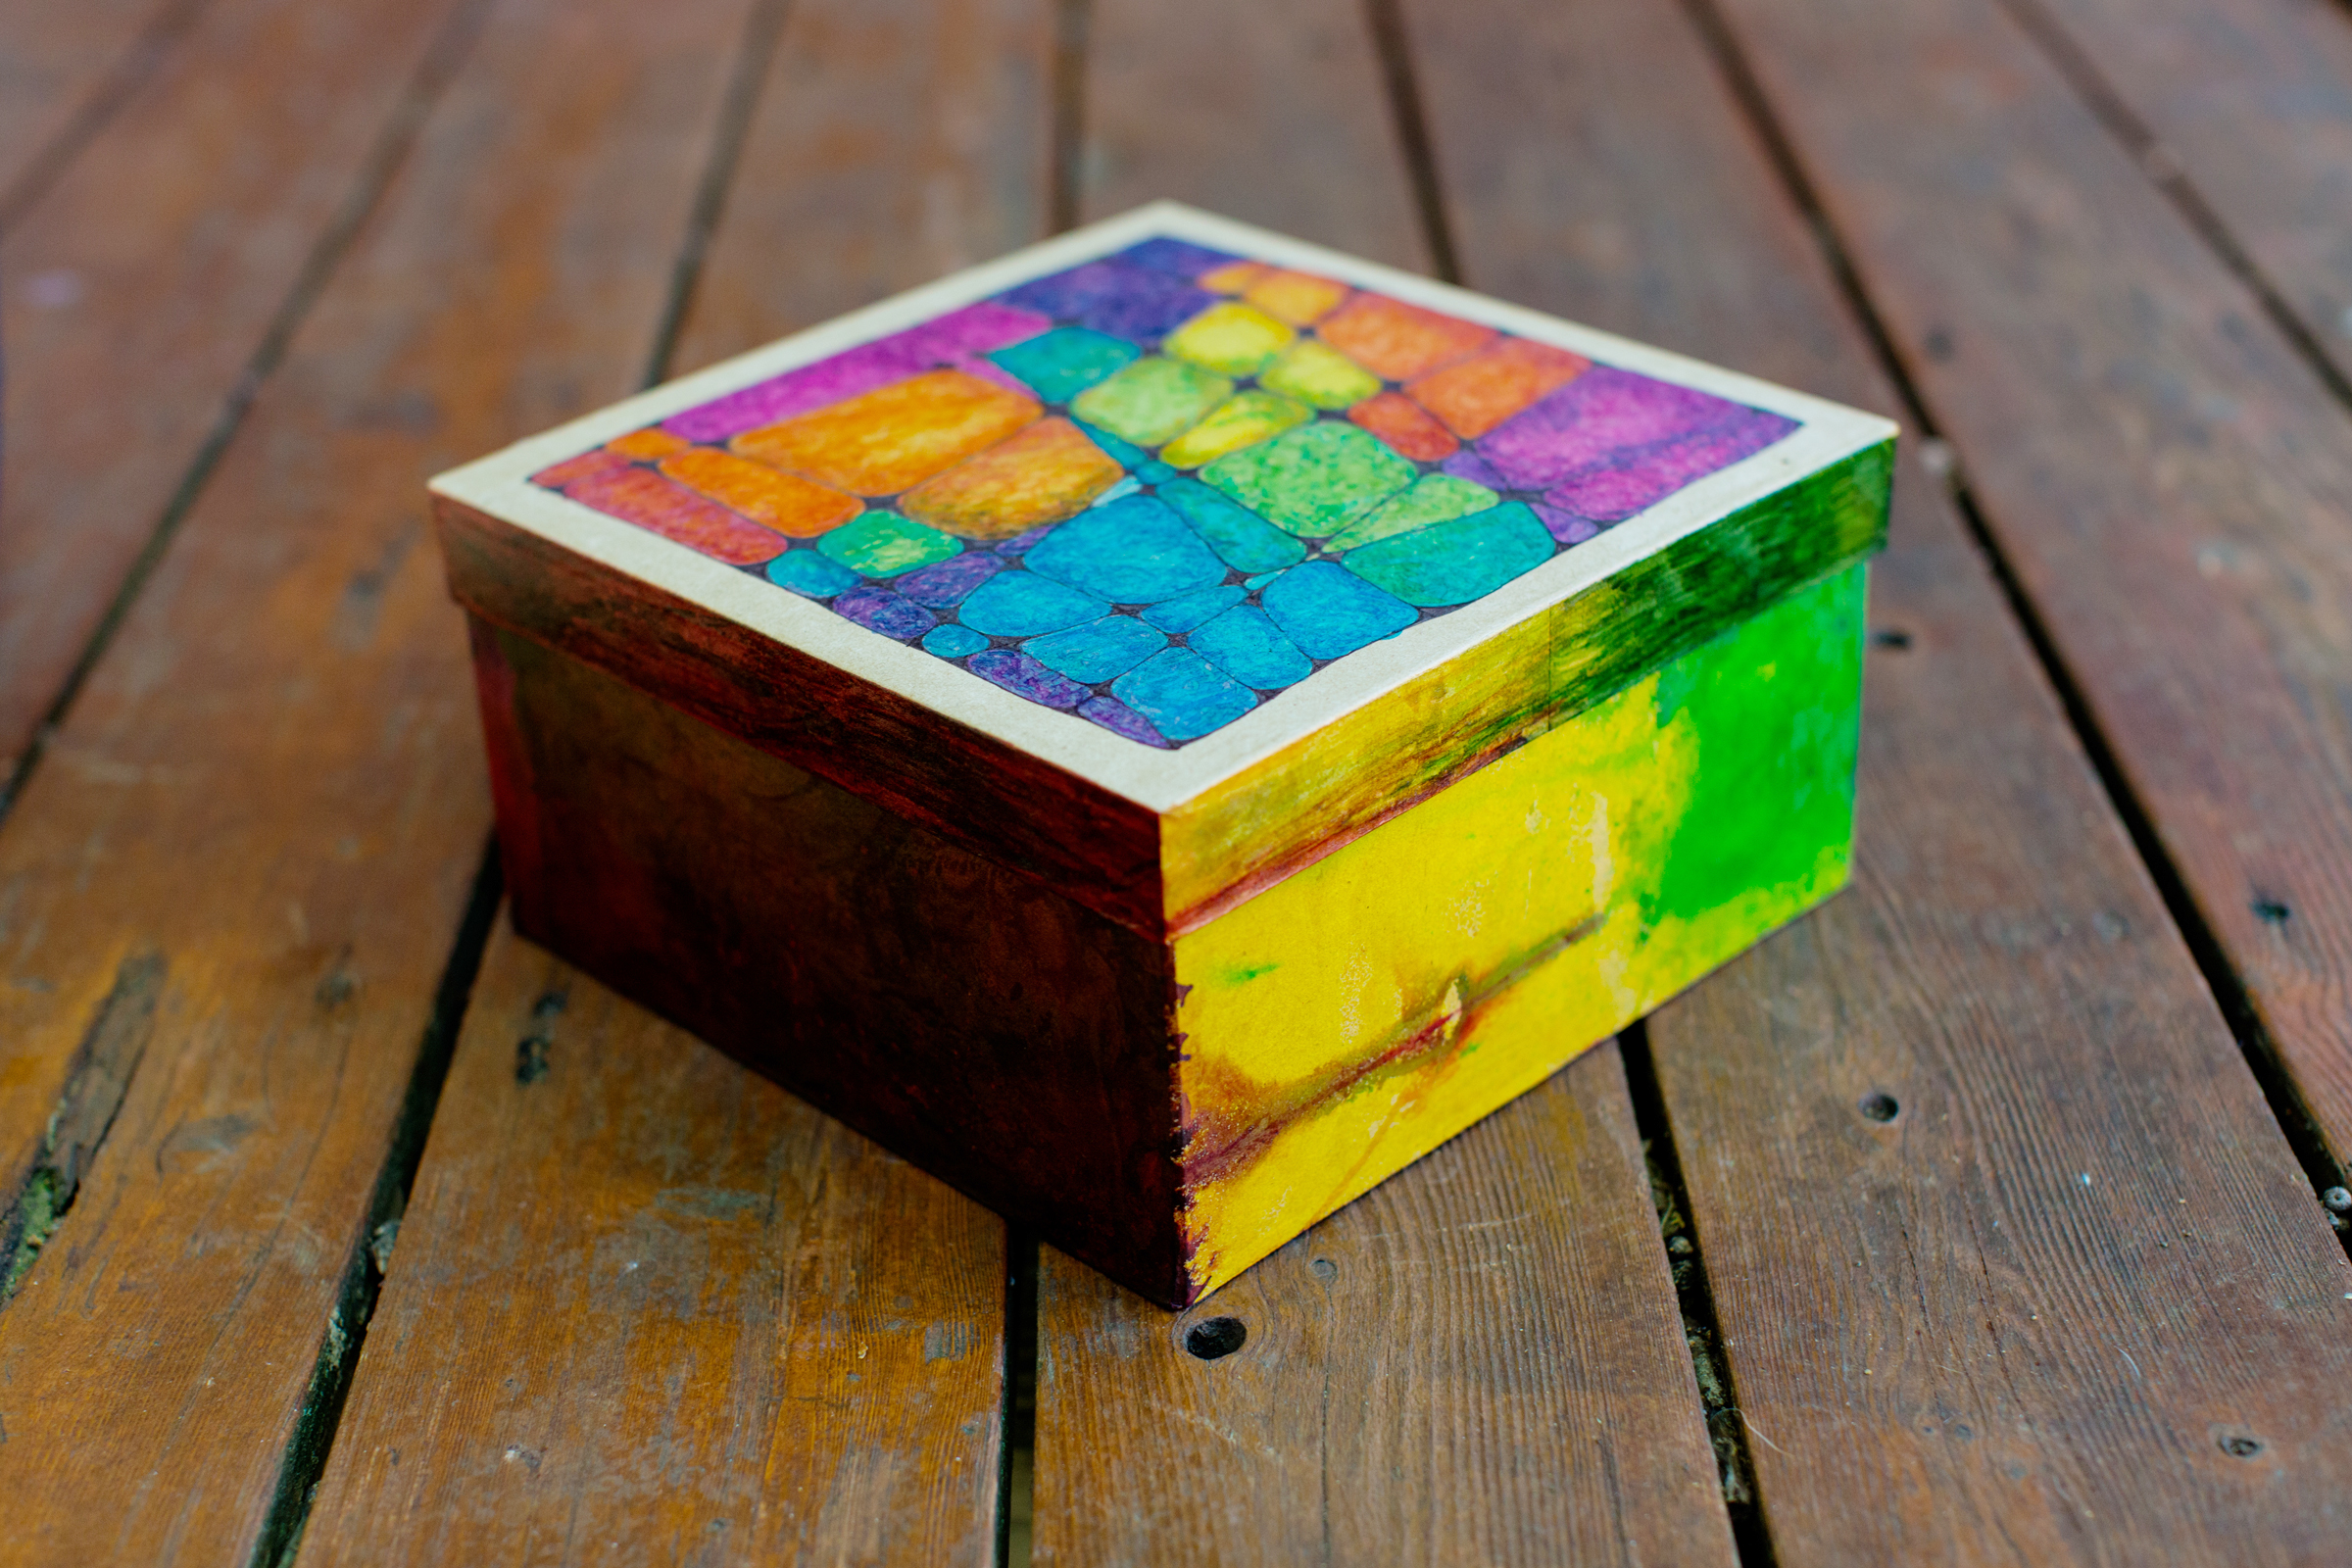 Artistic one-of-a-kind gift boxes are made by member artists.